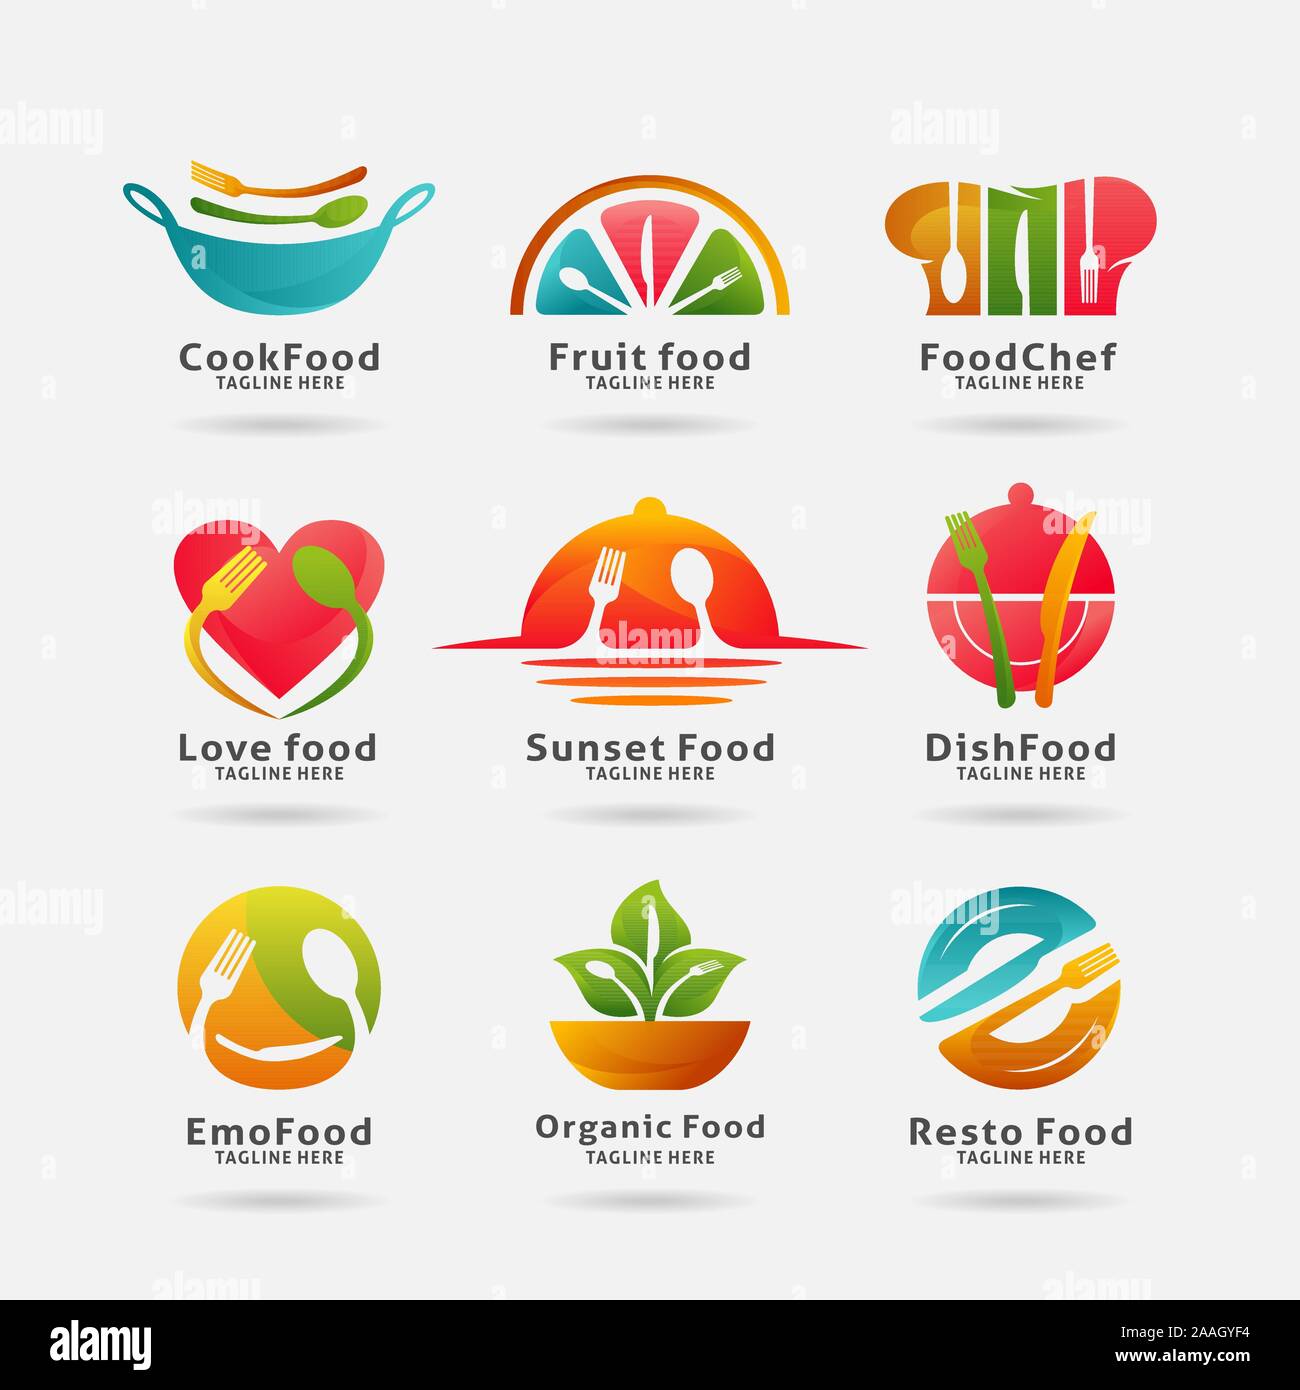 Collection Of Food And Restaurant Logo Design Stock Vector Image Art Alamy